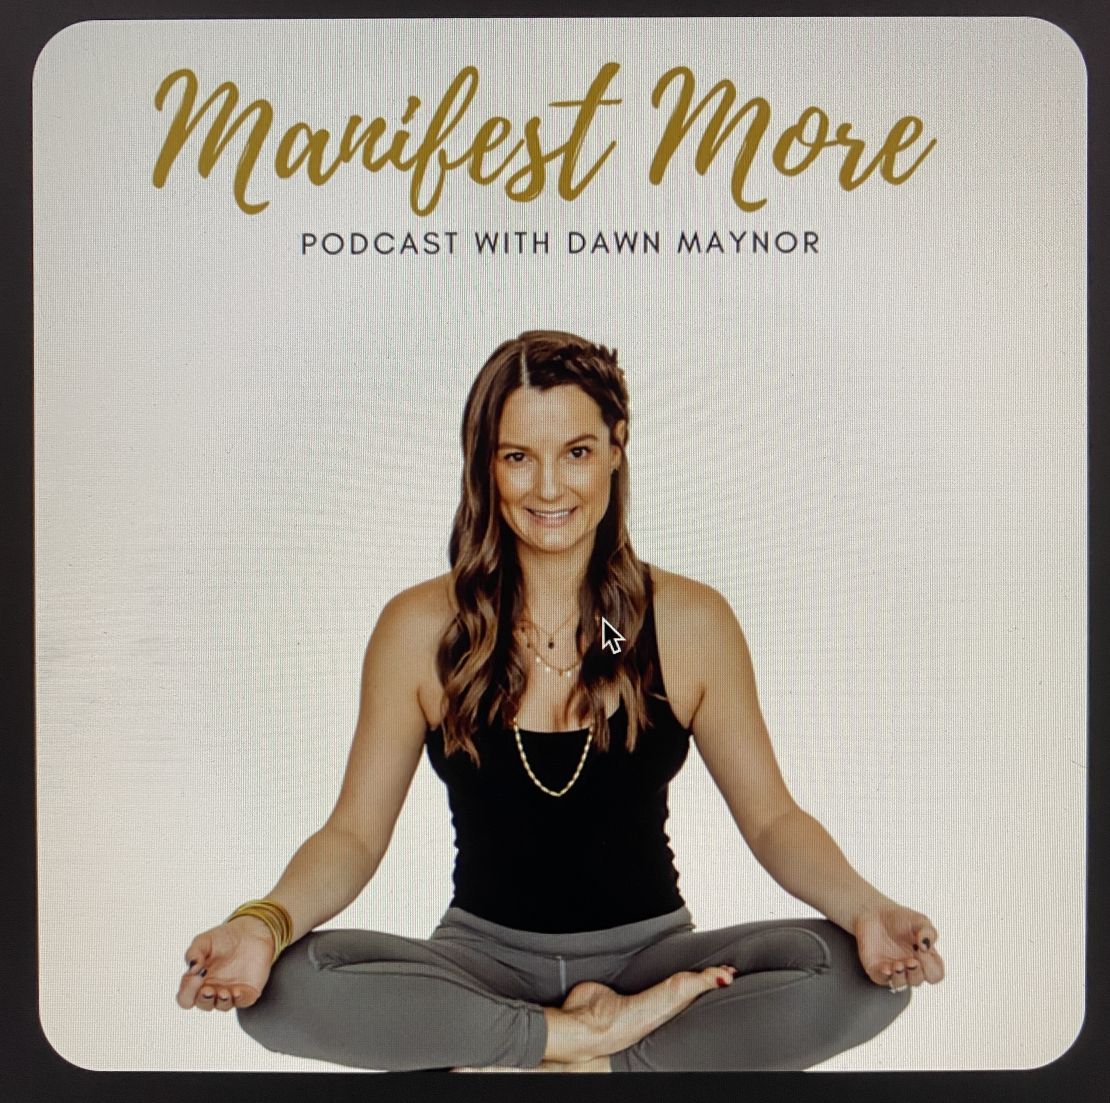 Manifest More Podcast with Dawn Maynor